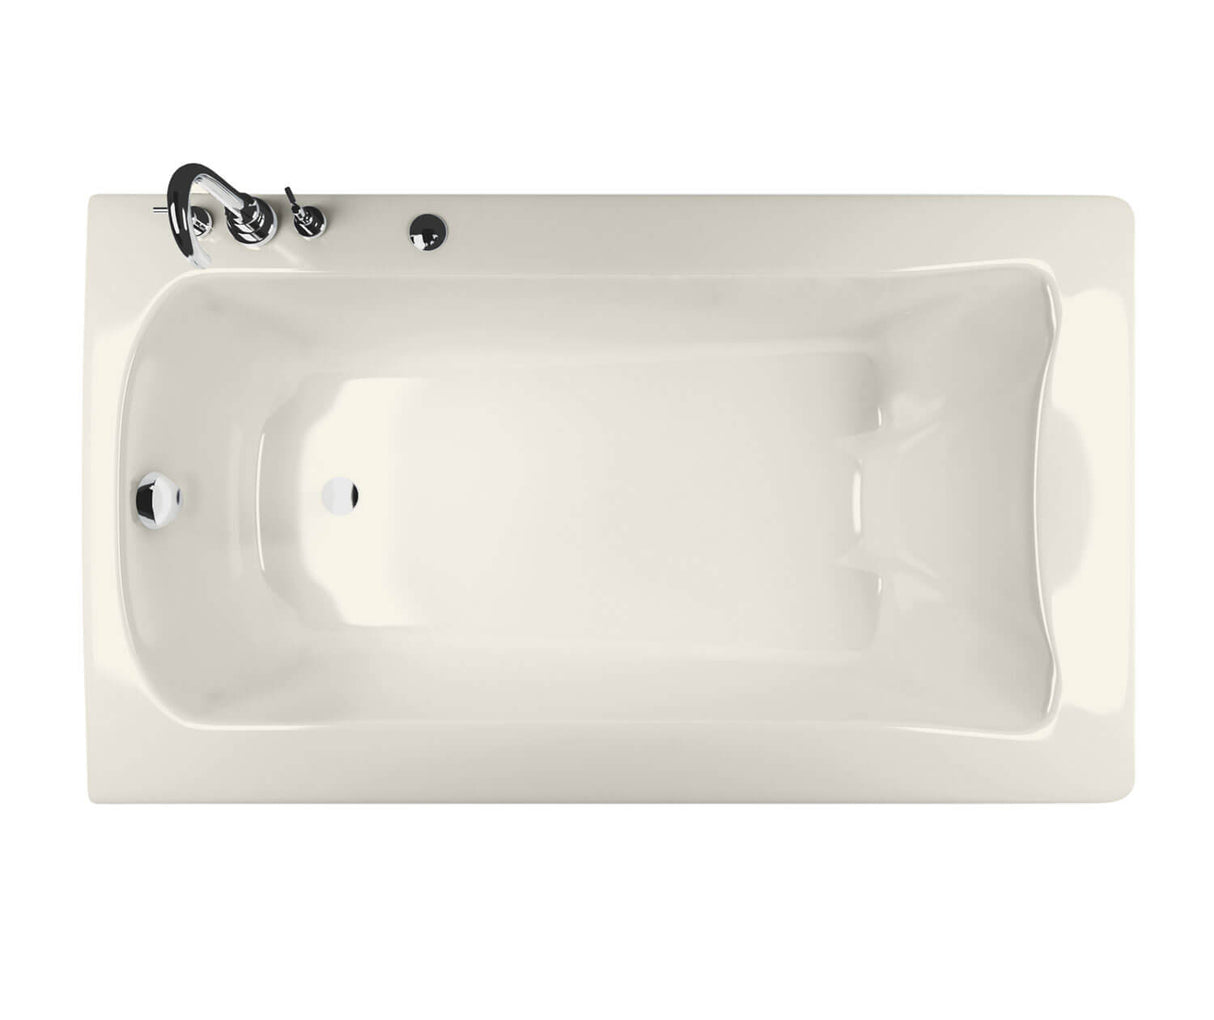 MAAX 105310-R-094-007 Release 6032 Acrylic Drop-in Right-Hand Drain Combined Hydromax & Aerofeel Bathtub in Biscuit